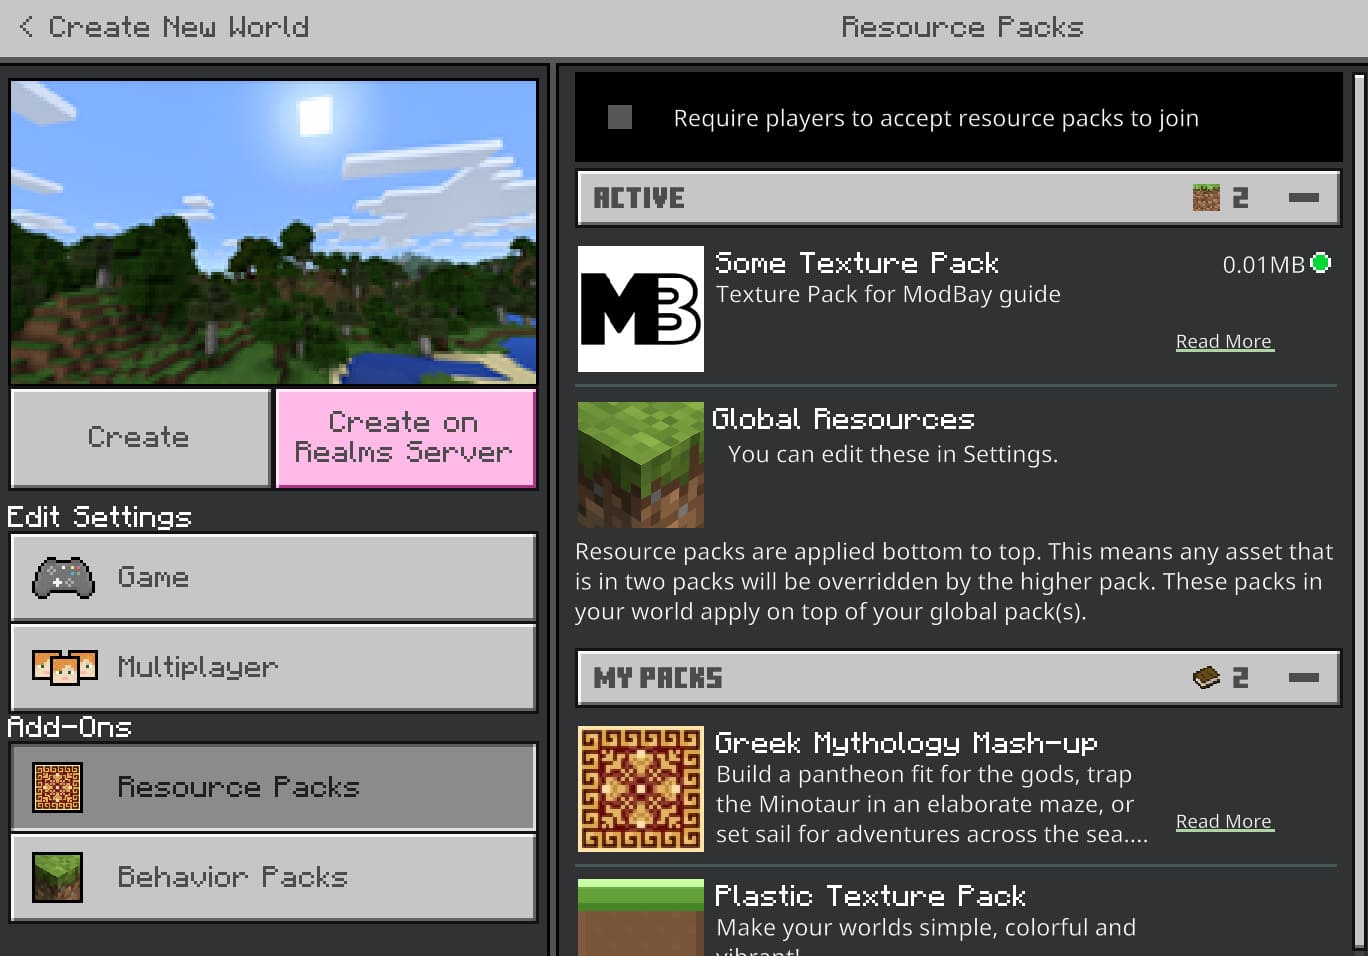 How to Download Texture Packs for Minecraft Windows 10?